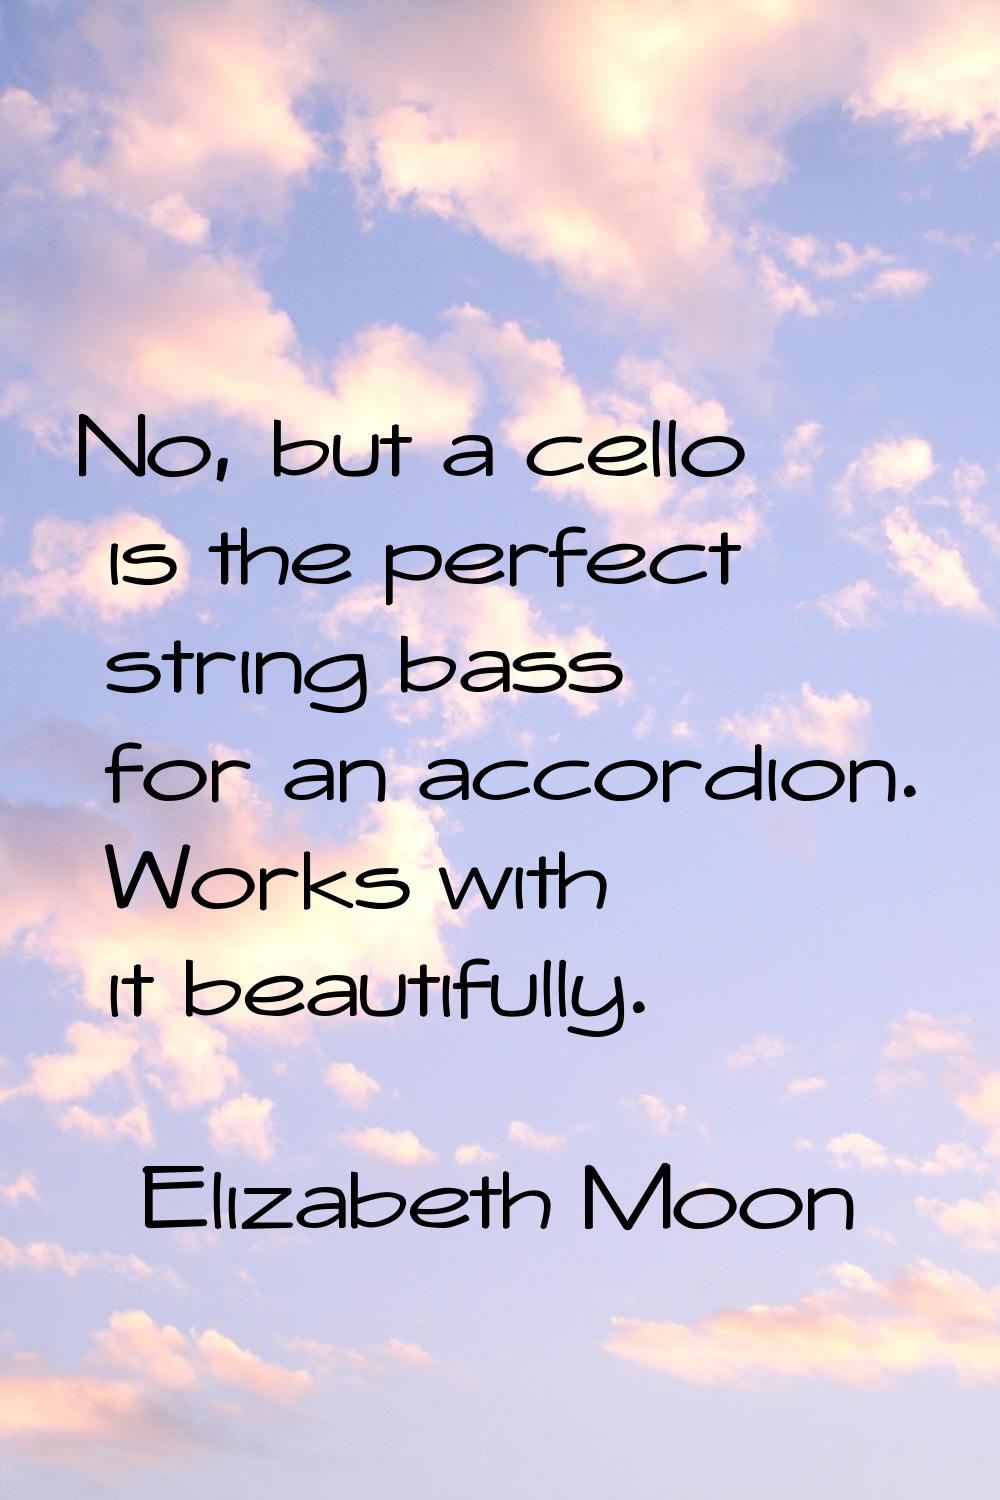 No, but a cello is the perfect string bass for an accordion. Works with it beautifully.